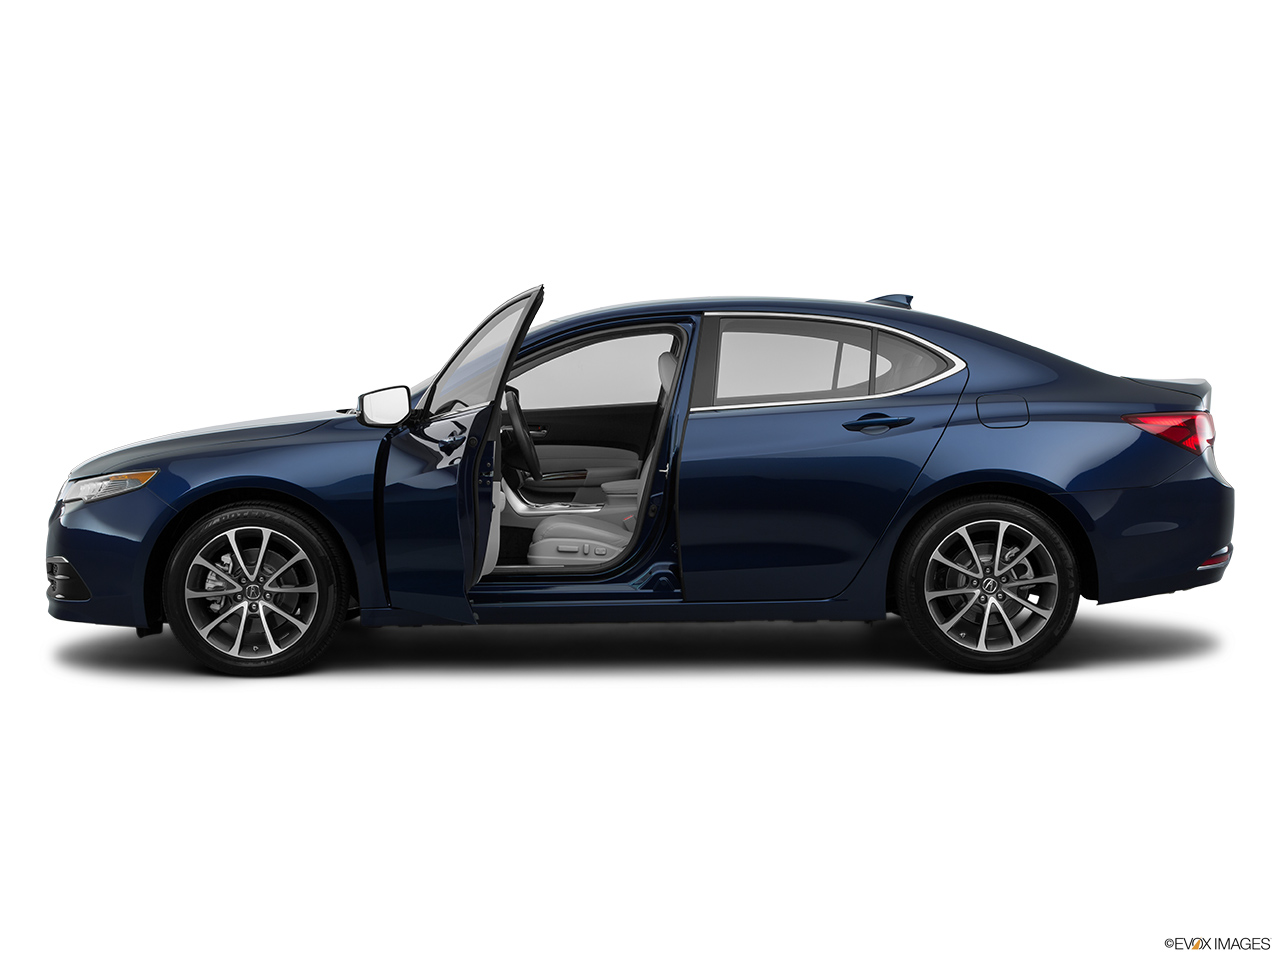 2015 Acura TLX 3.5 V-6 9-AT P-AWS Driver's side profile with drivers side door open. 